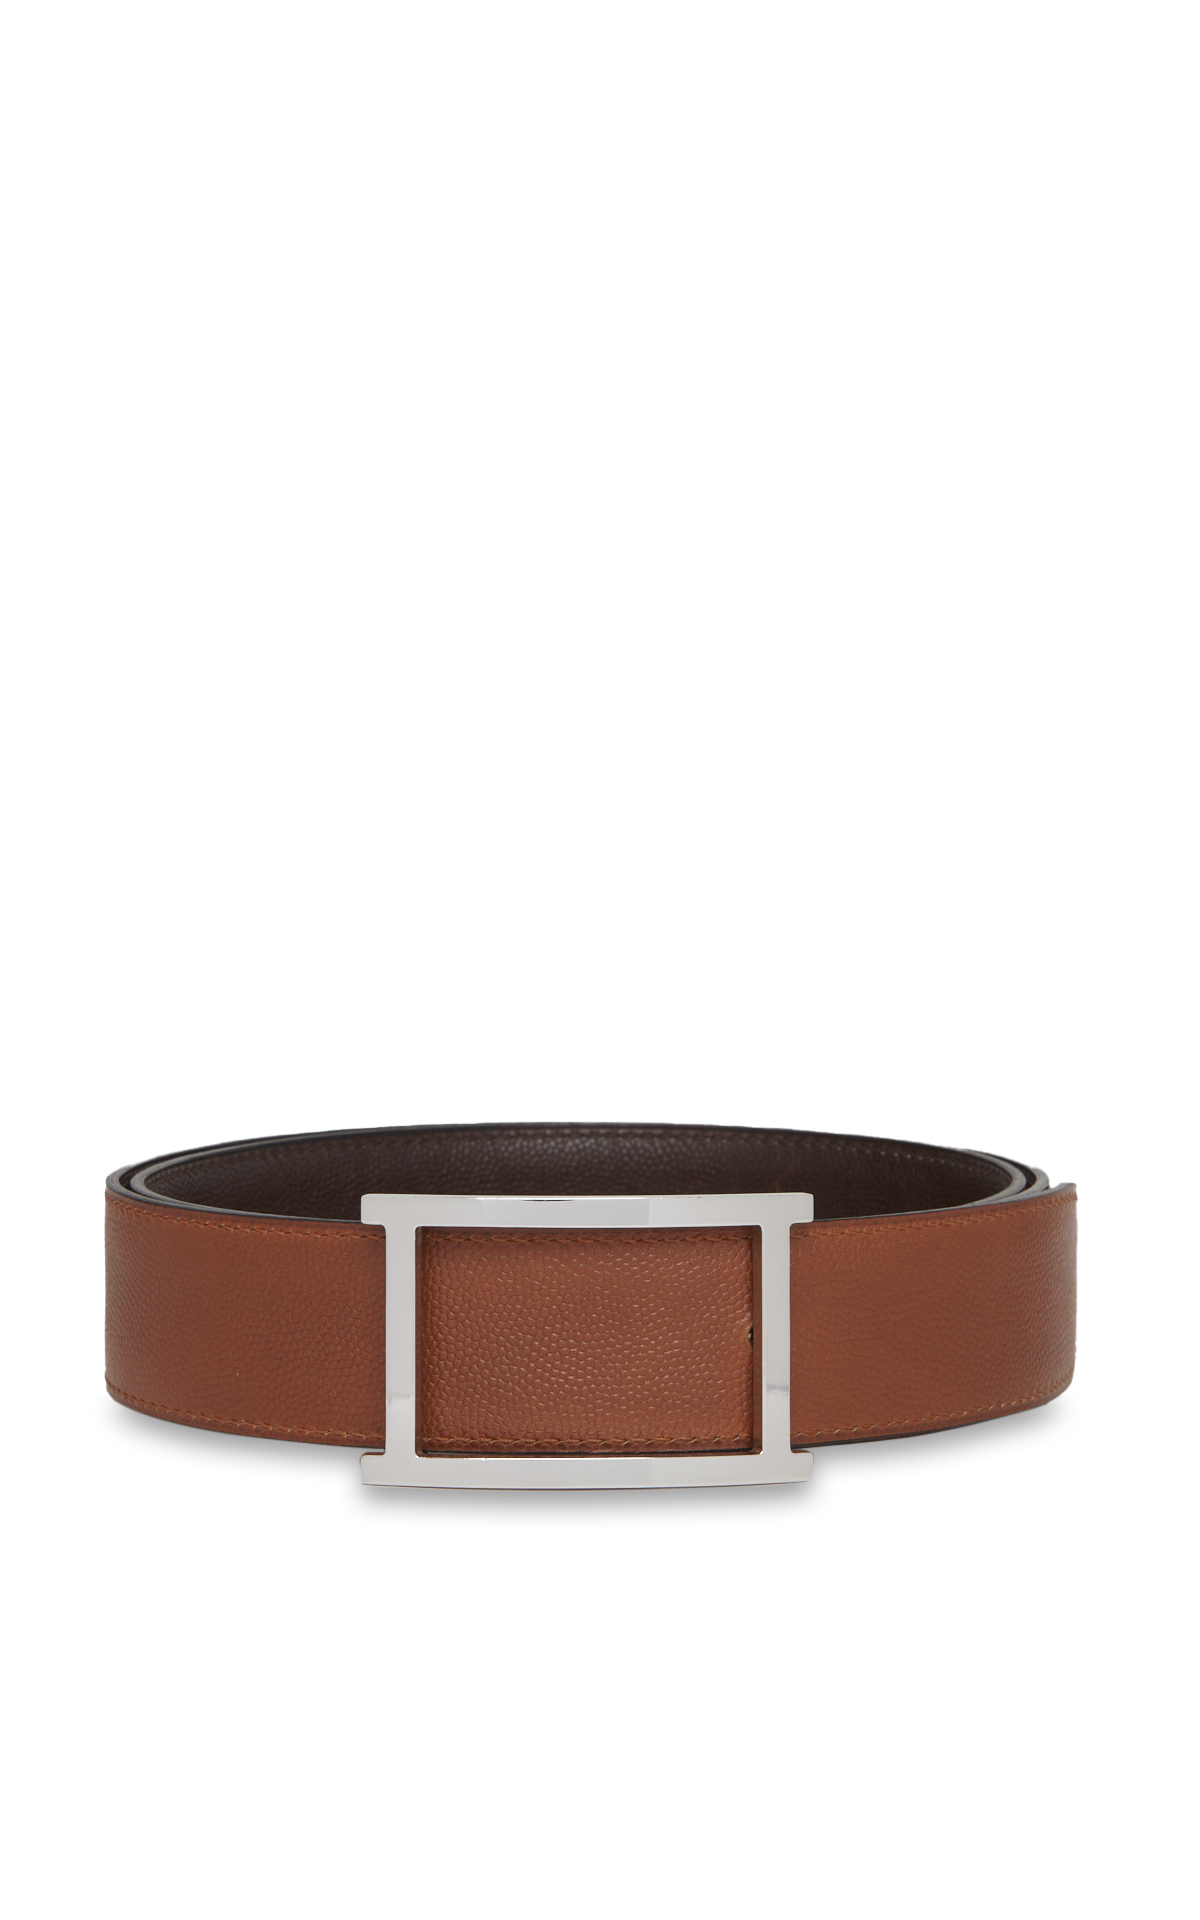 Camel leather belt with silver buckle 